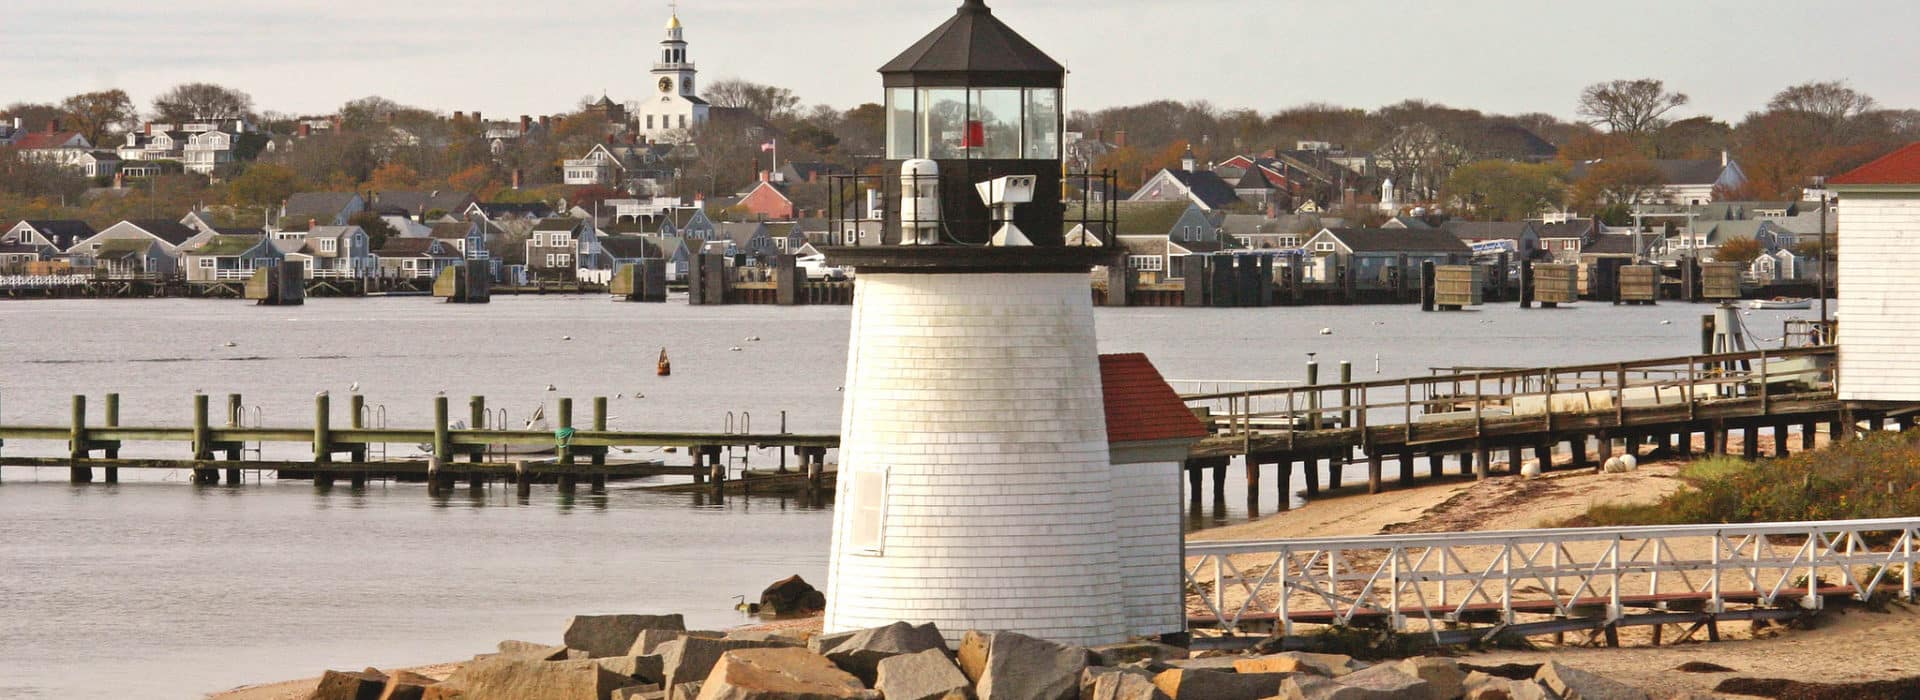 Lighthouse near a pier and water in the fall